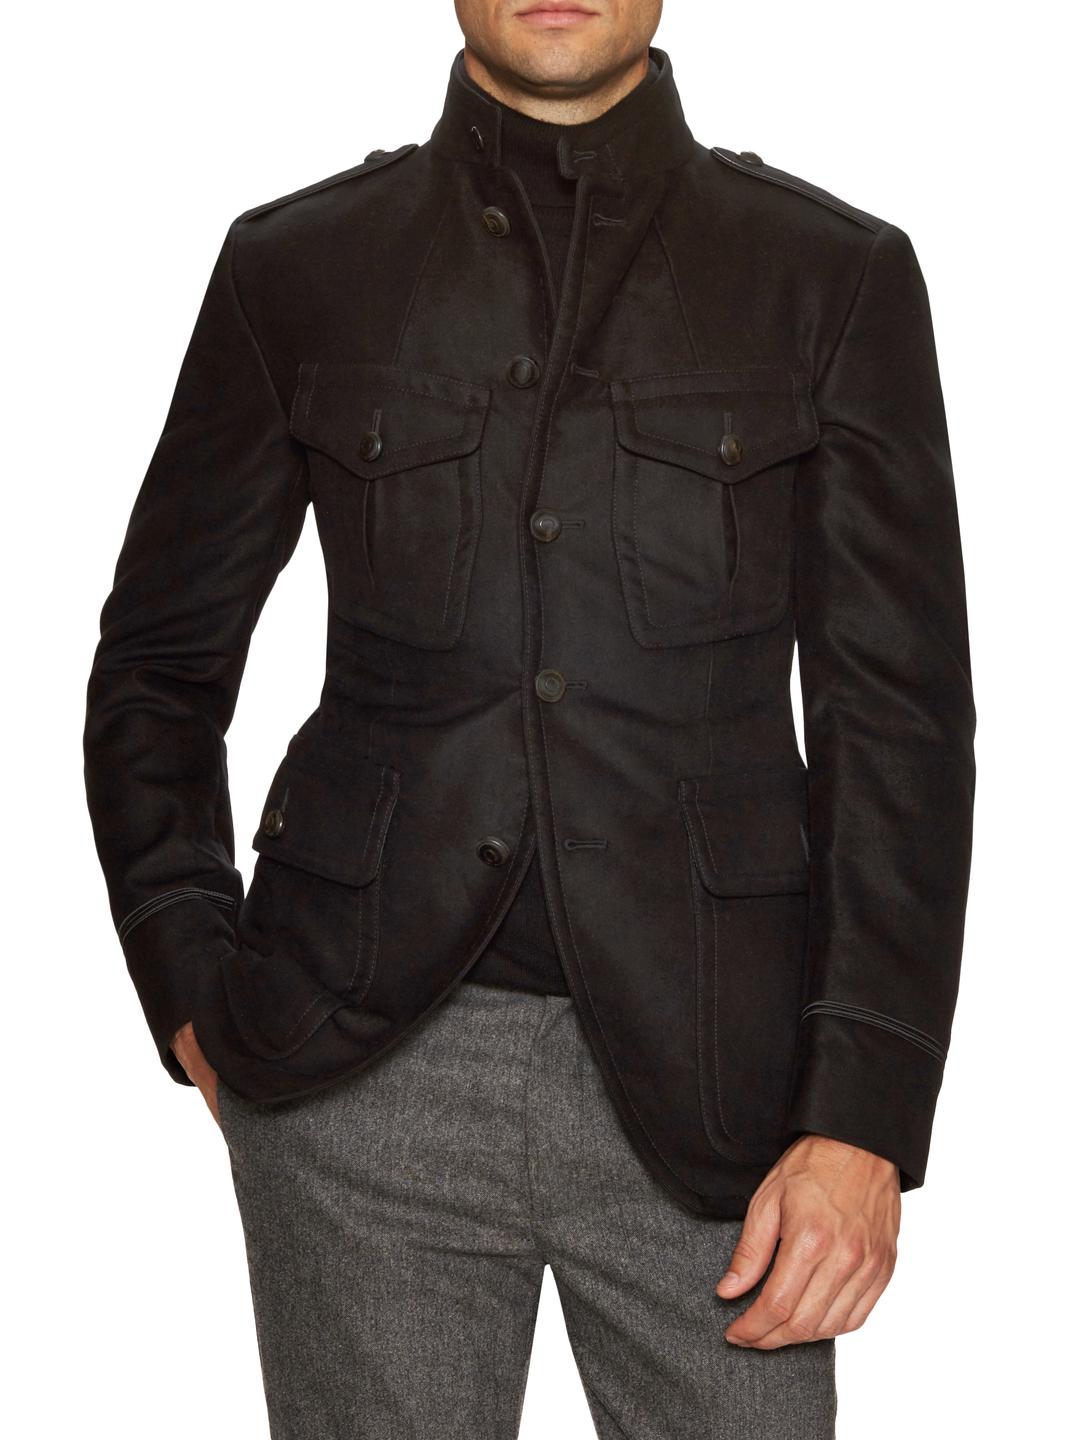 Tom Ford Synthetic Woven Military Jacket in Black for Men - Lyst